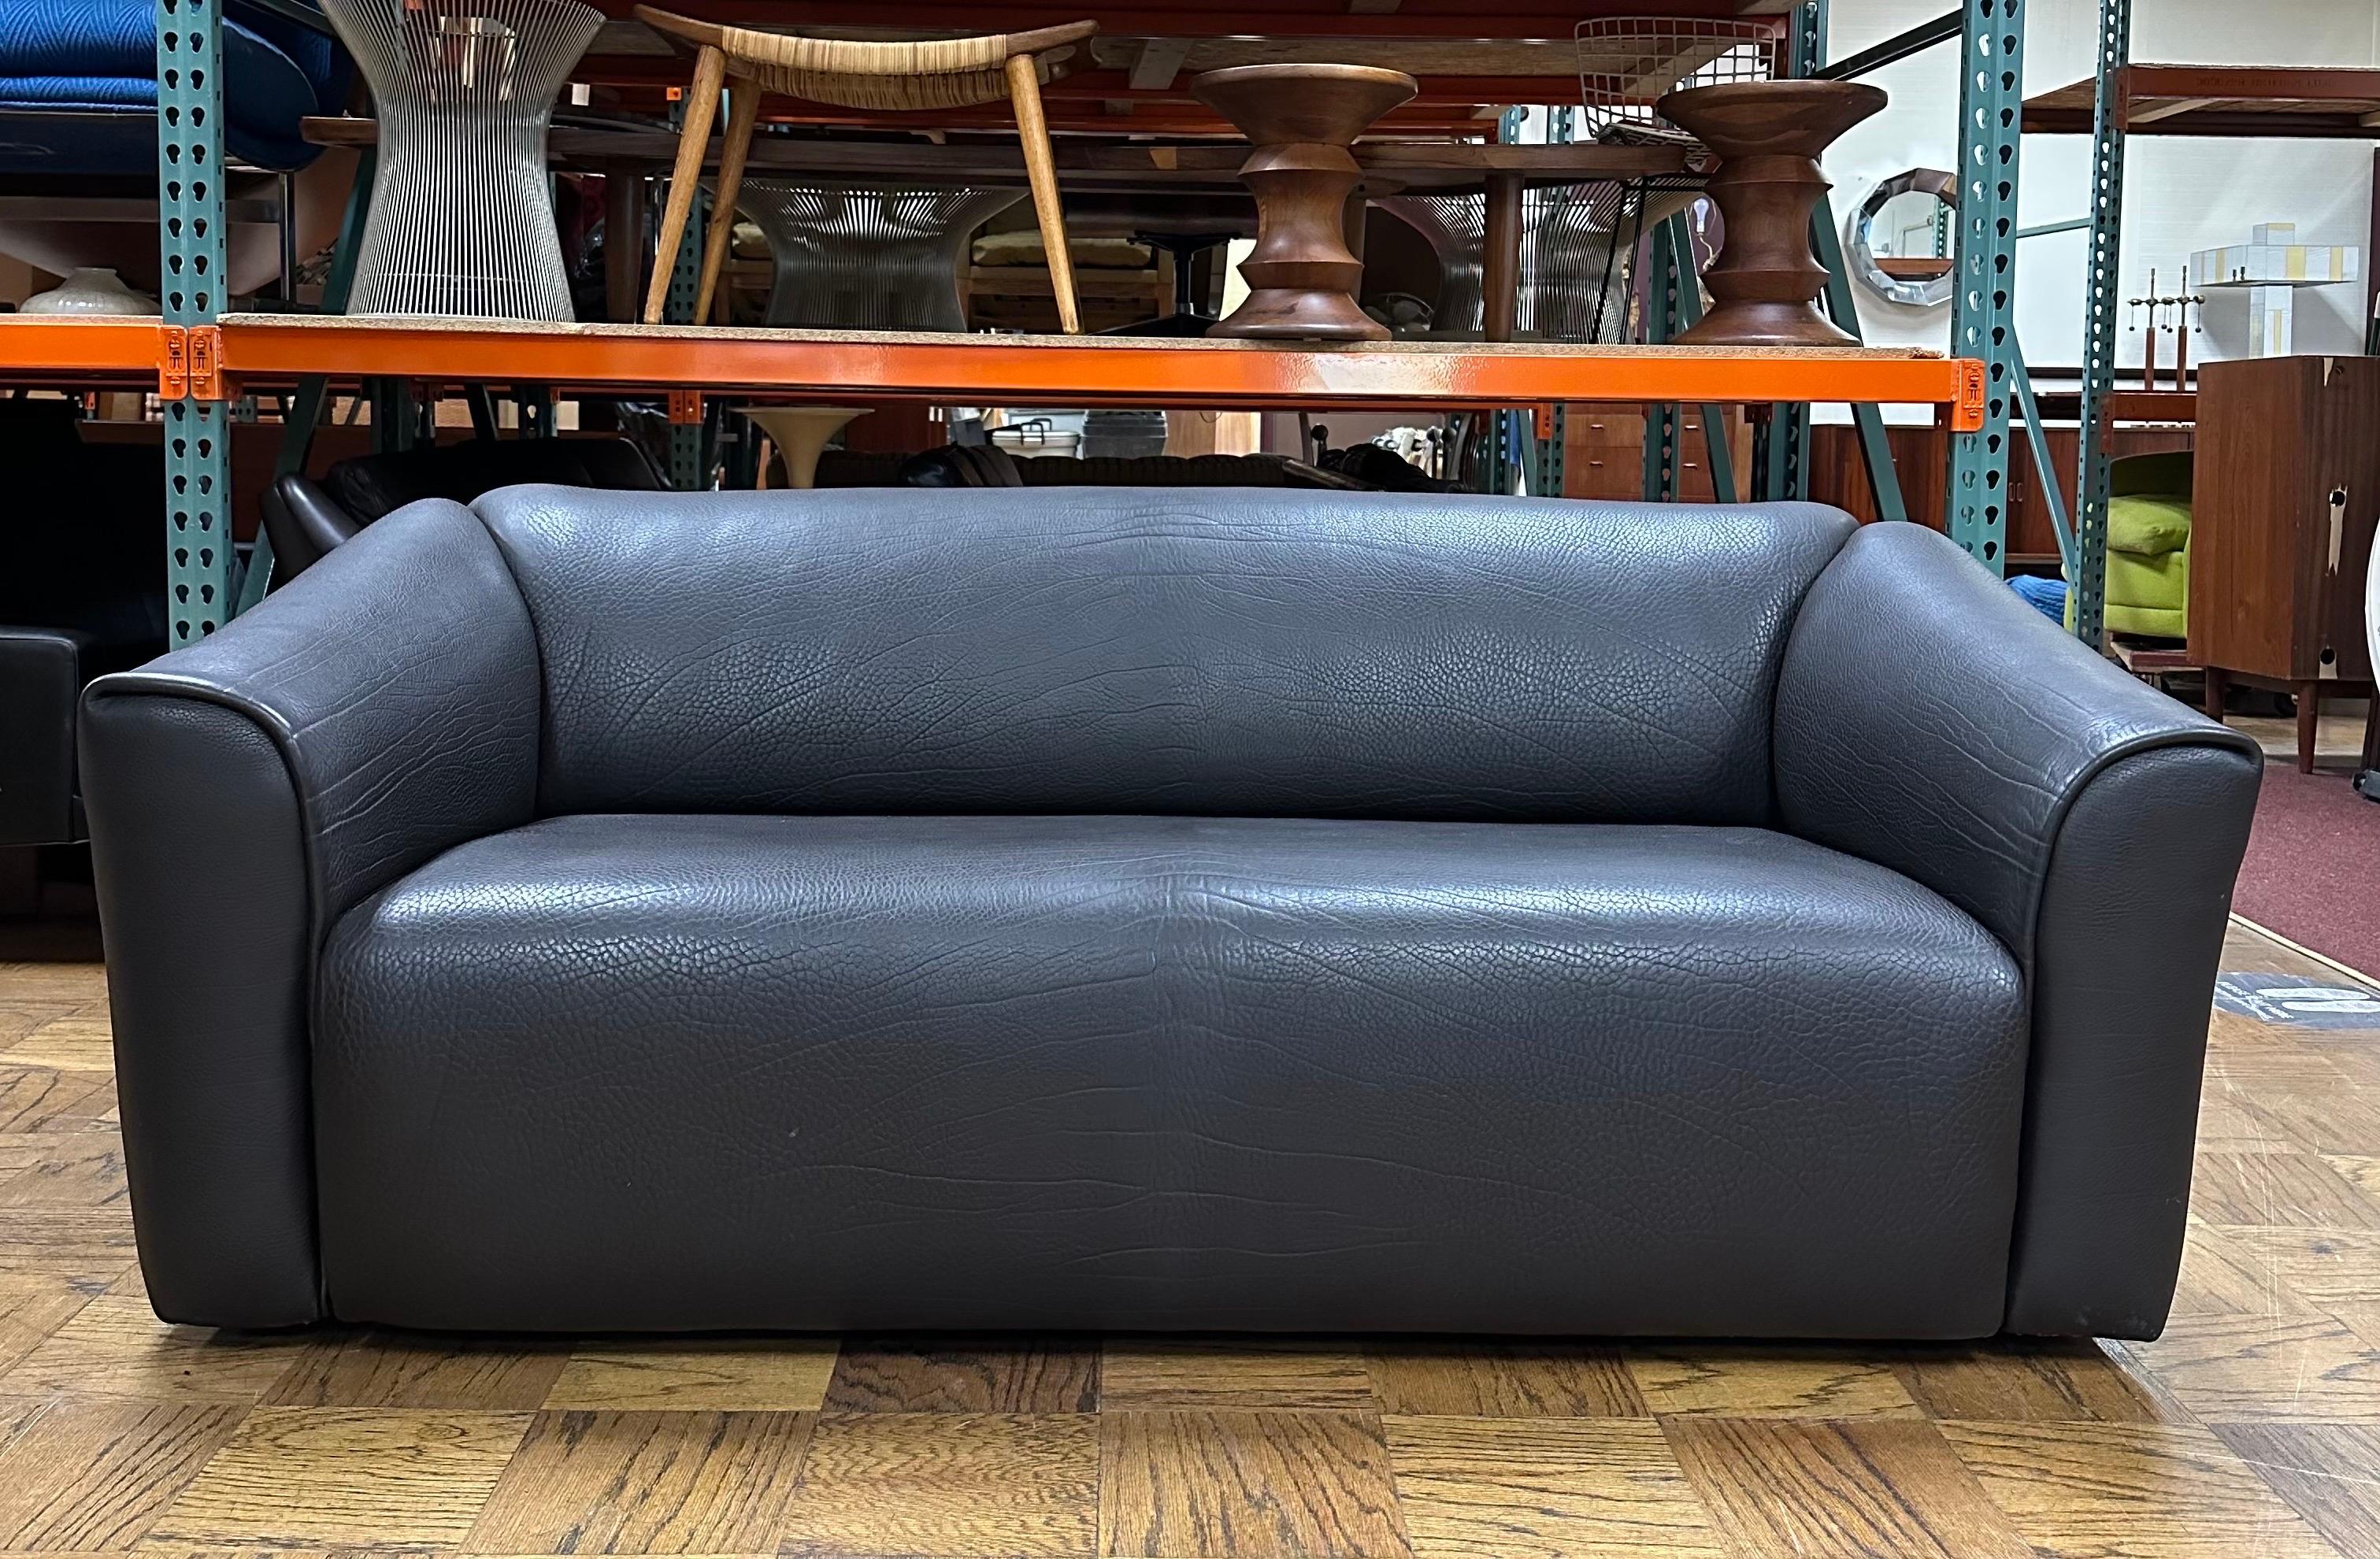 De Sede DS47 Black Leather Sofa. Sofa has an extendable seat for more sitting depth. De Sede is known for its high quality 5mm thick Buffalo Leather. Made in Switzerland.